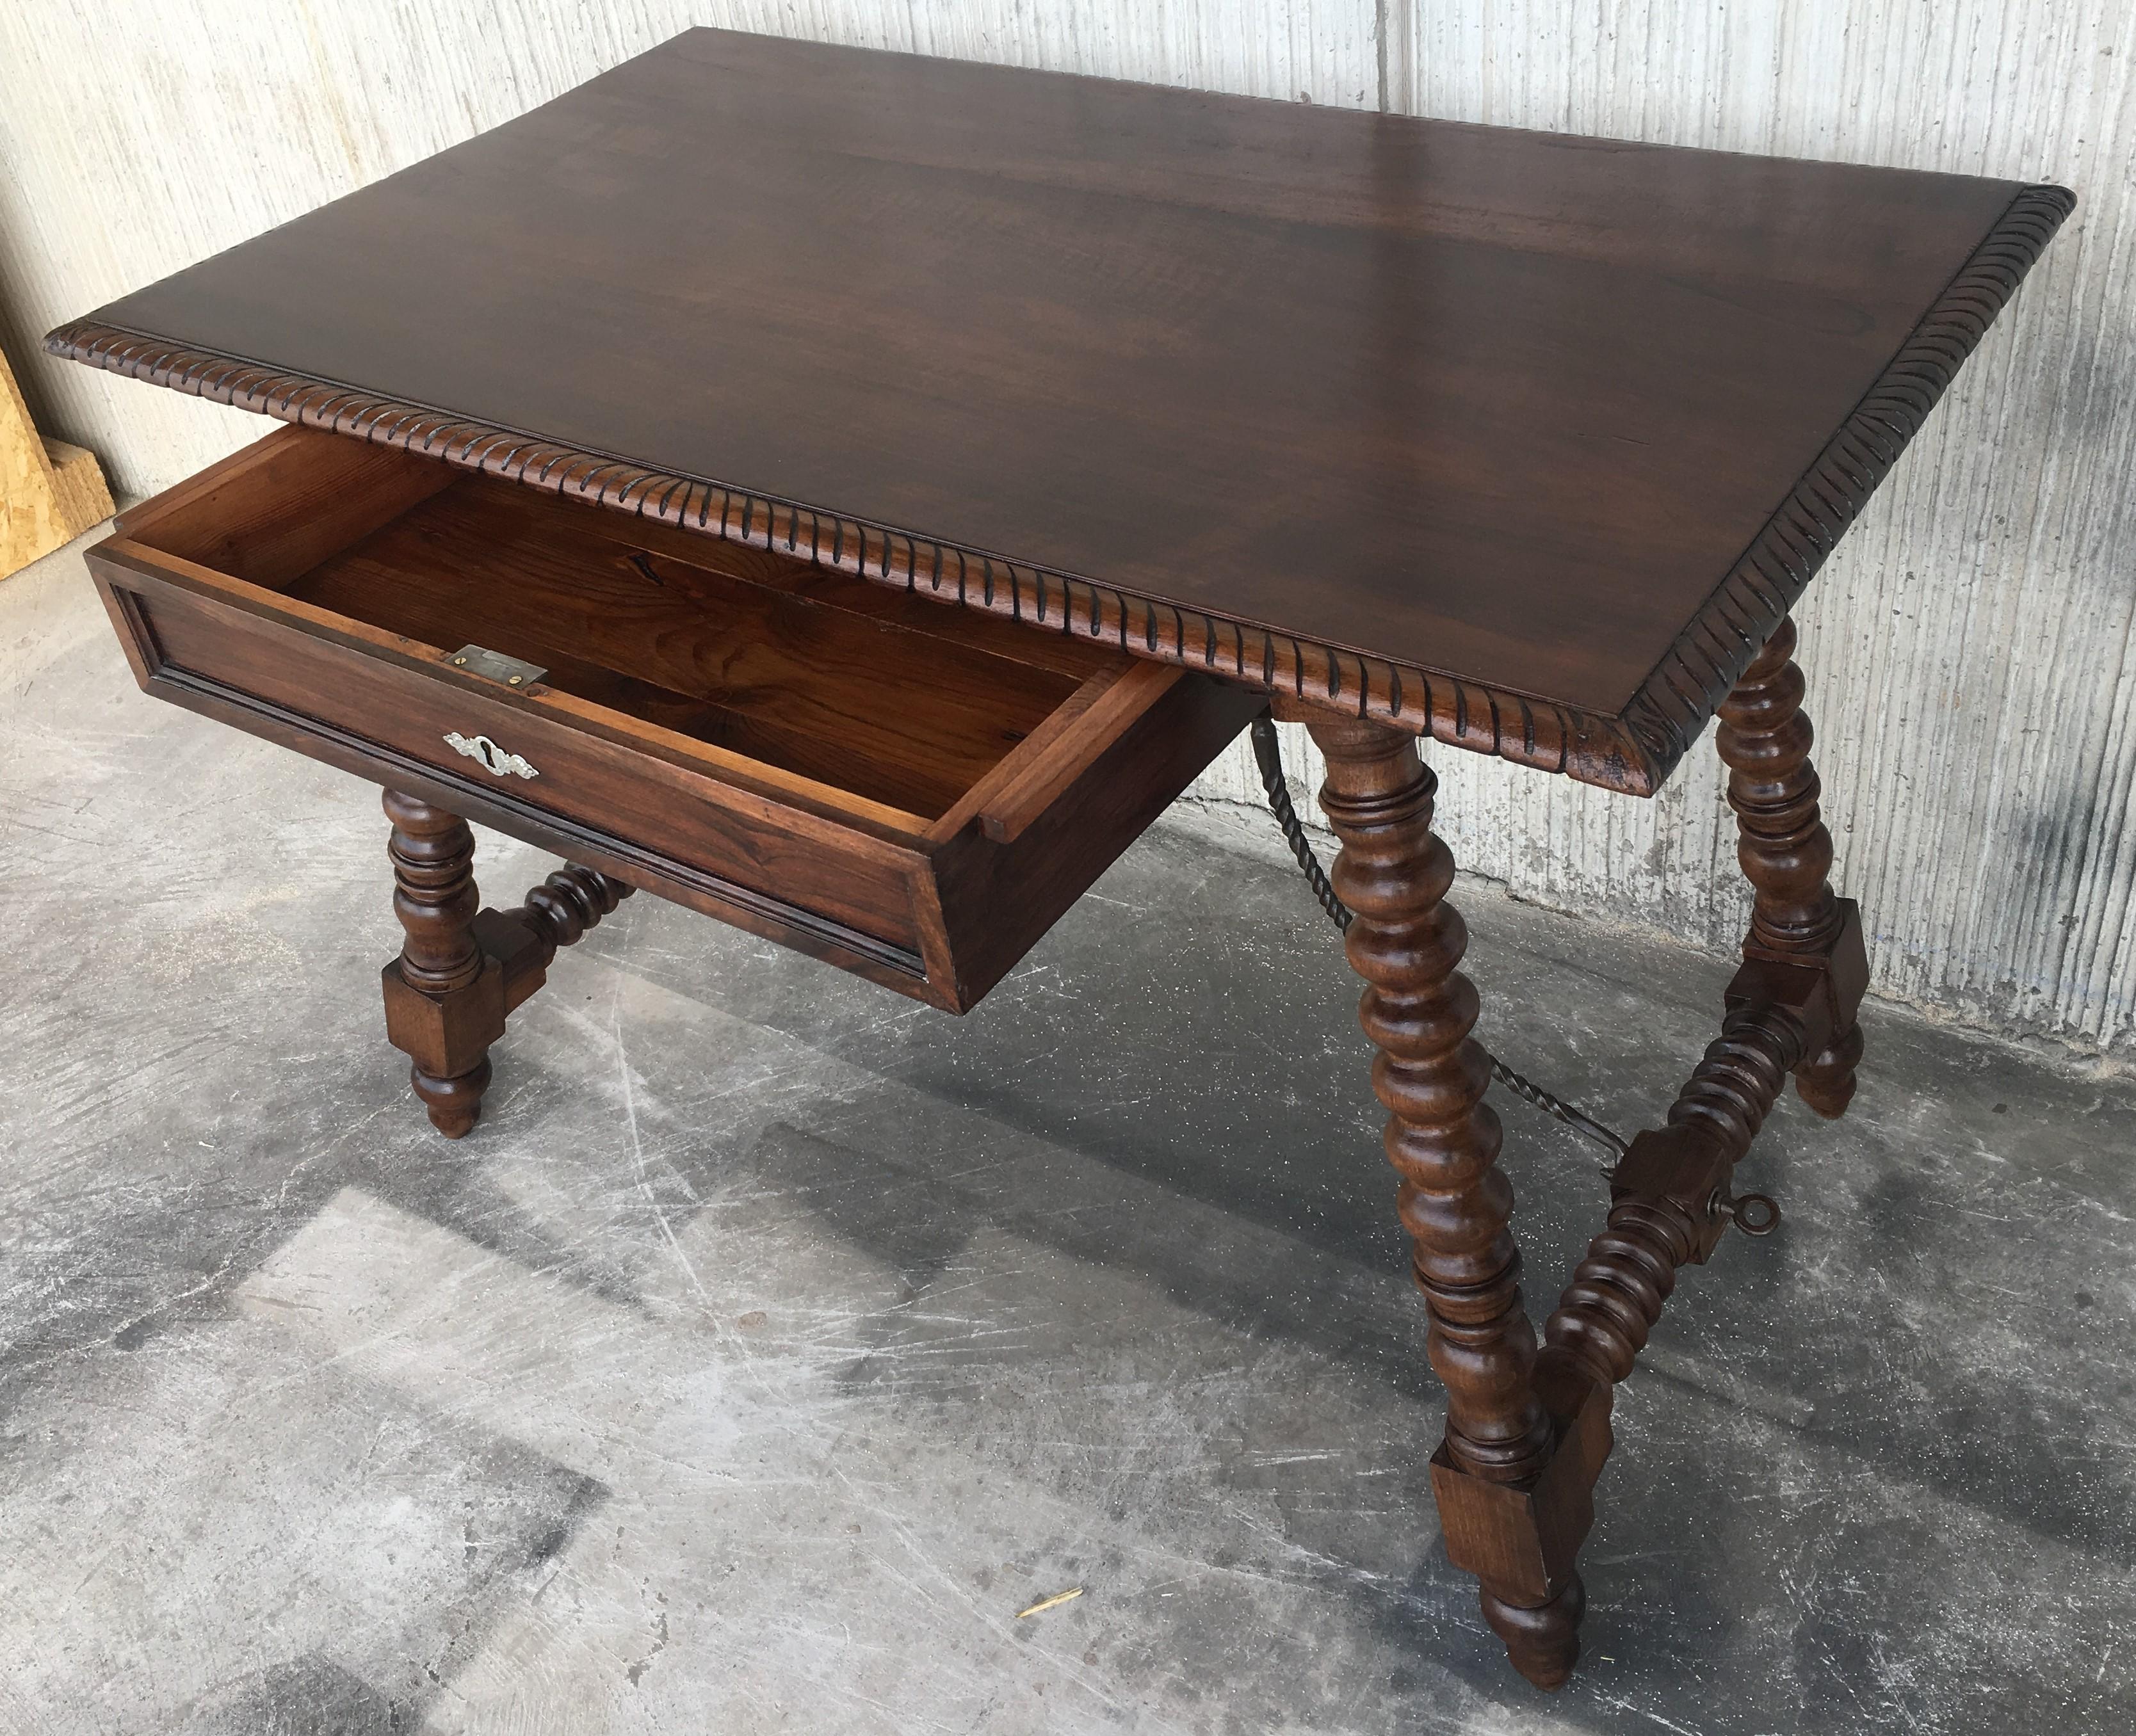 18th Spanish Revival Refectory Desk Table with One Drawer (Eisen)